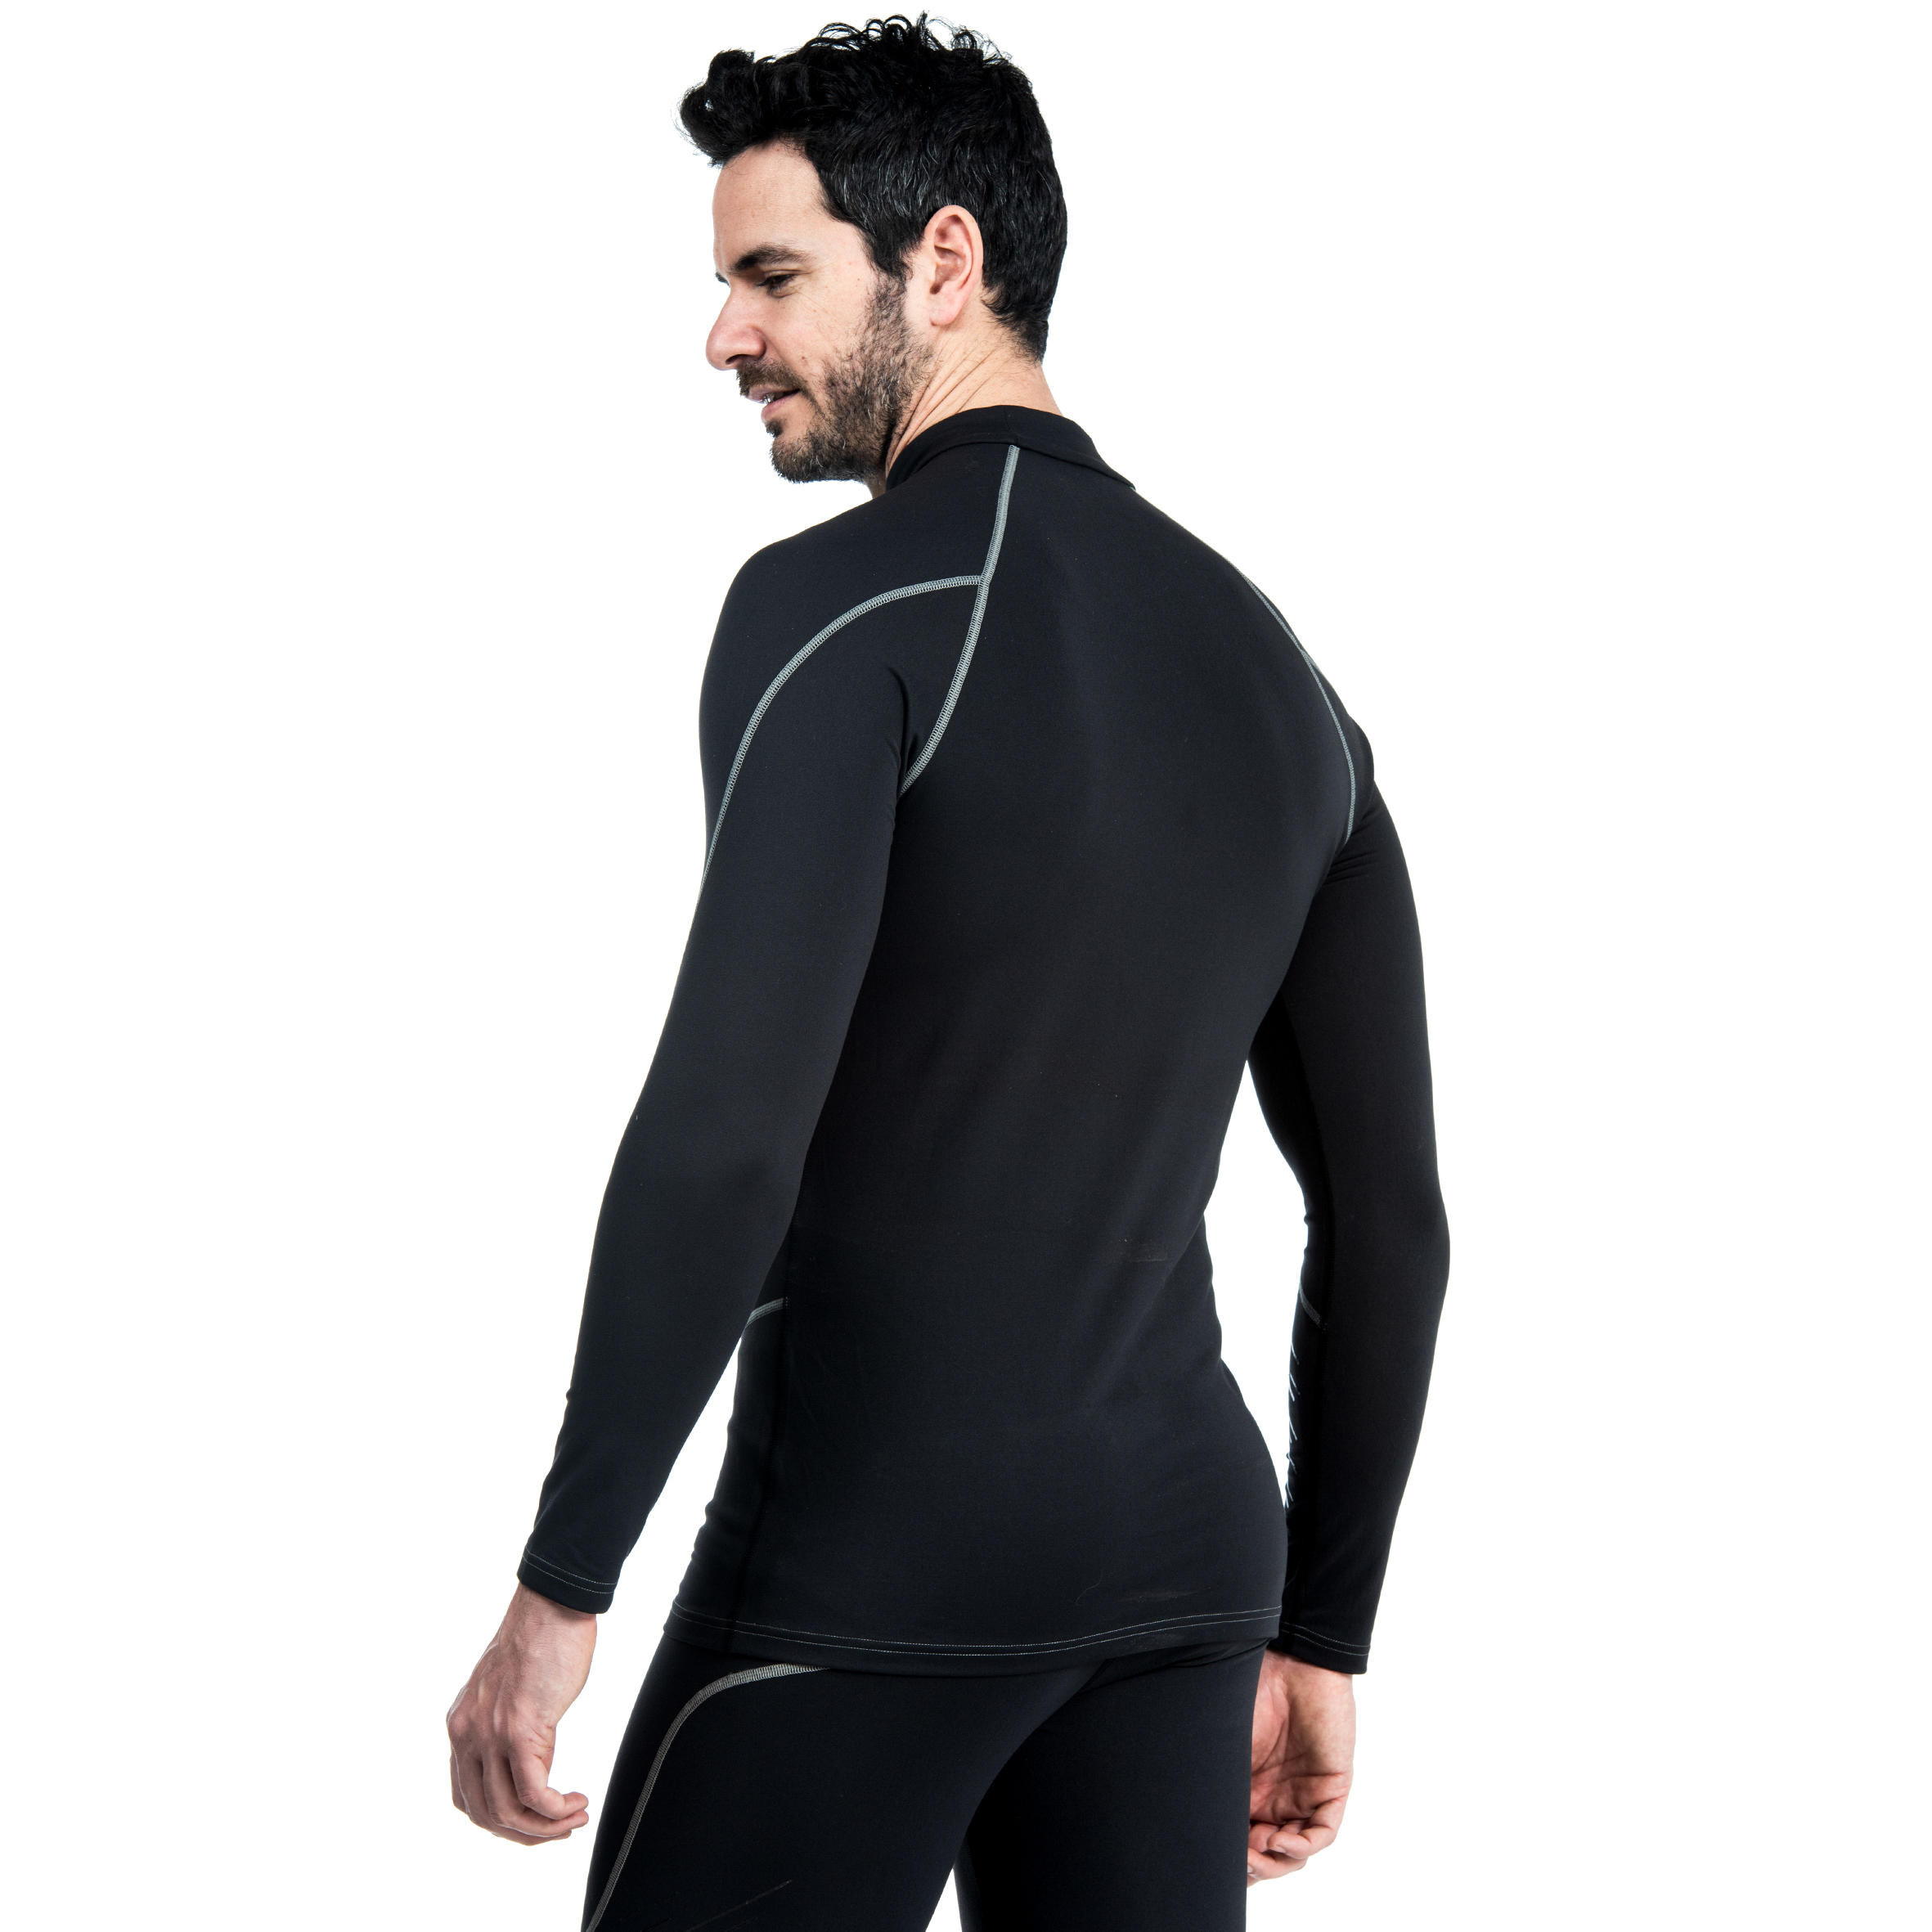 Men's Long-Sleeved Rugby Base Layer Top R500 - Black 9/10